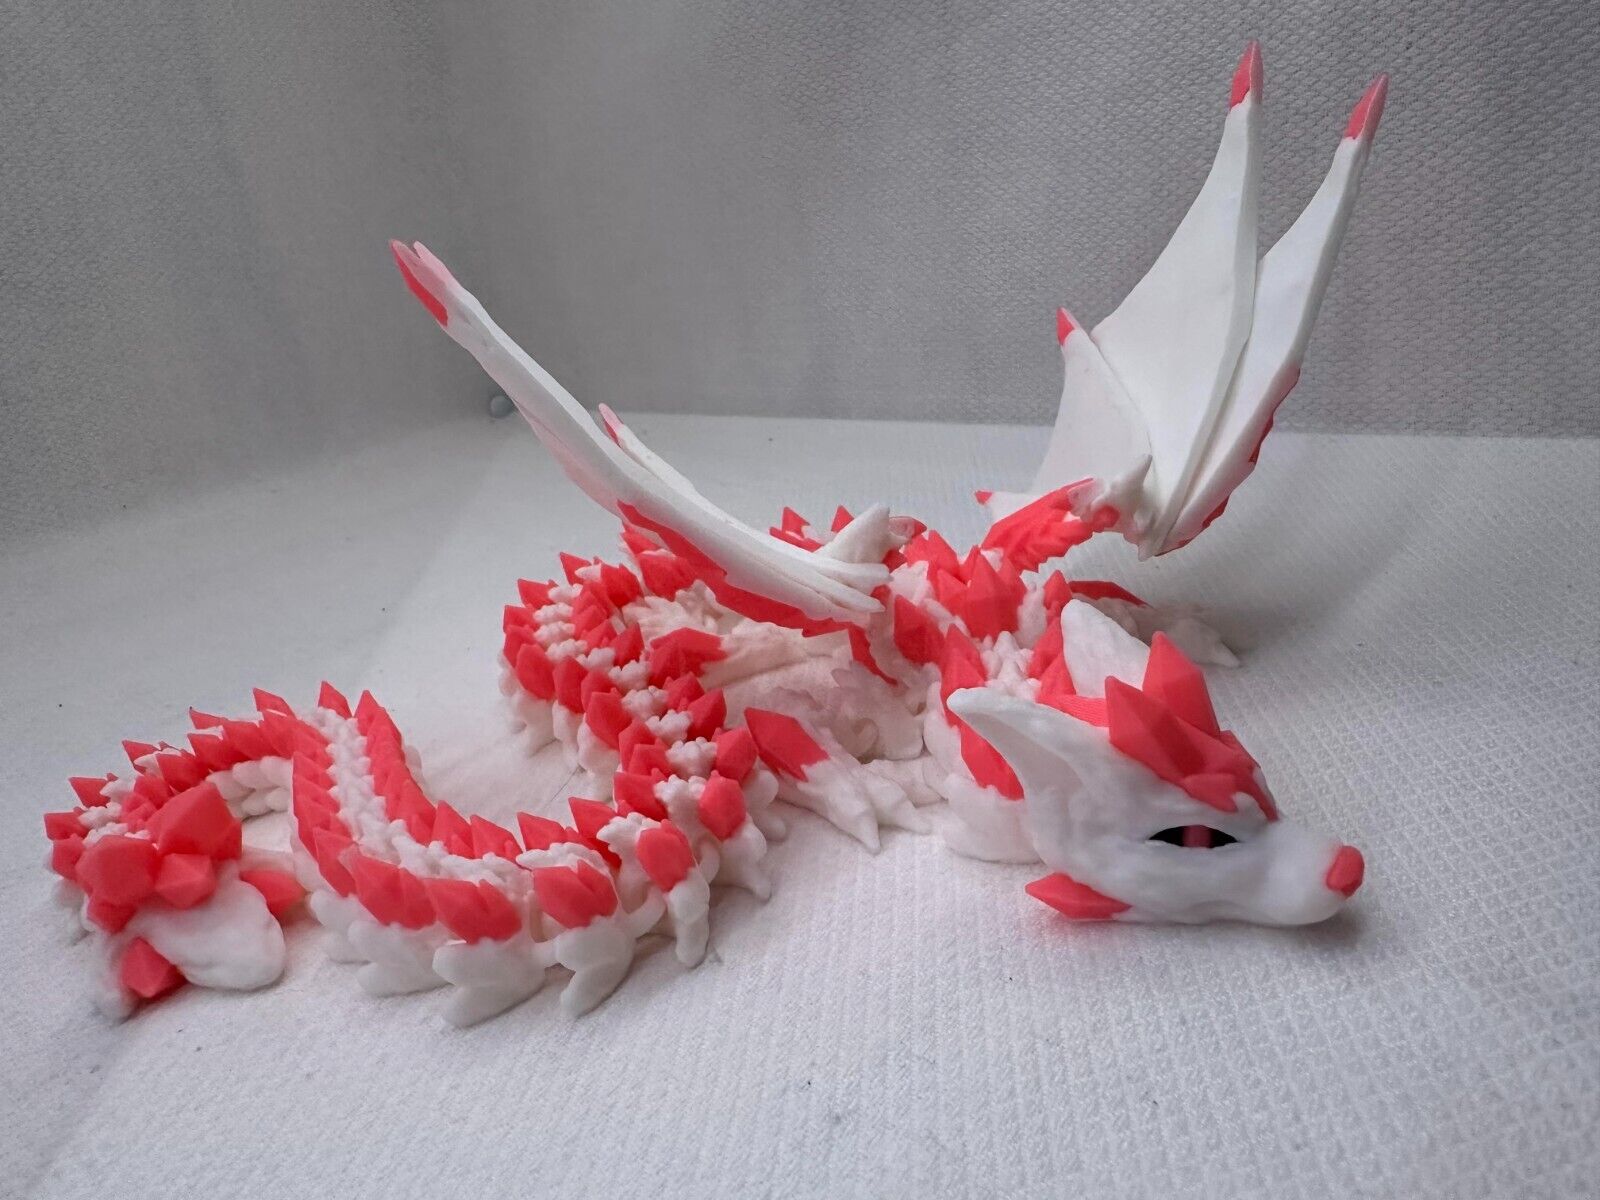 Articulating Wolf Dragon 3D Printed Large 18 Inch Fidget